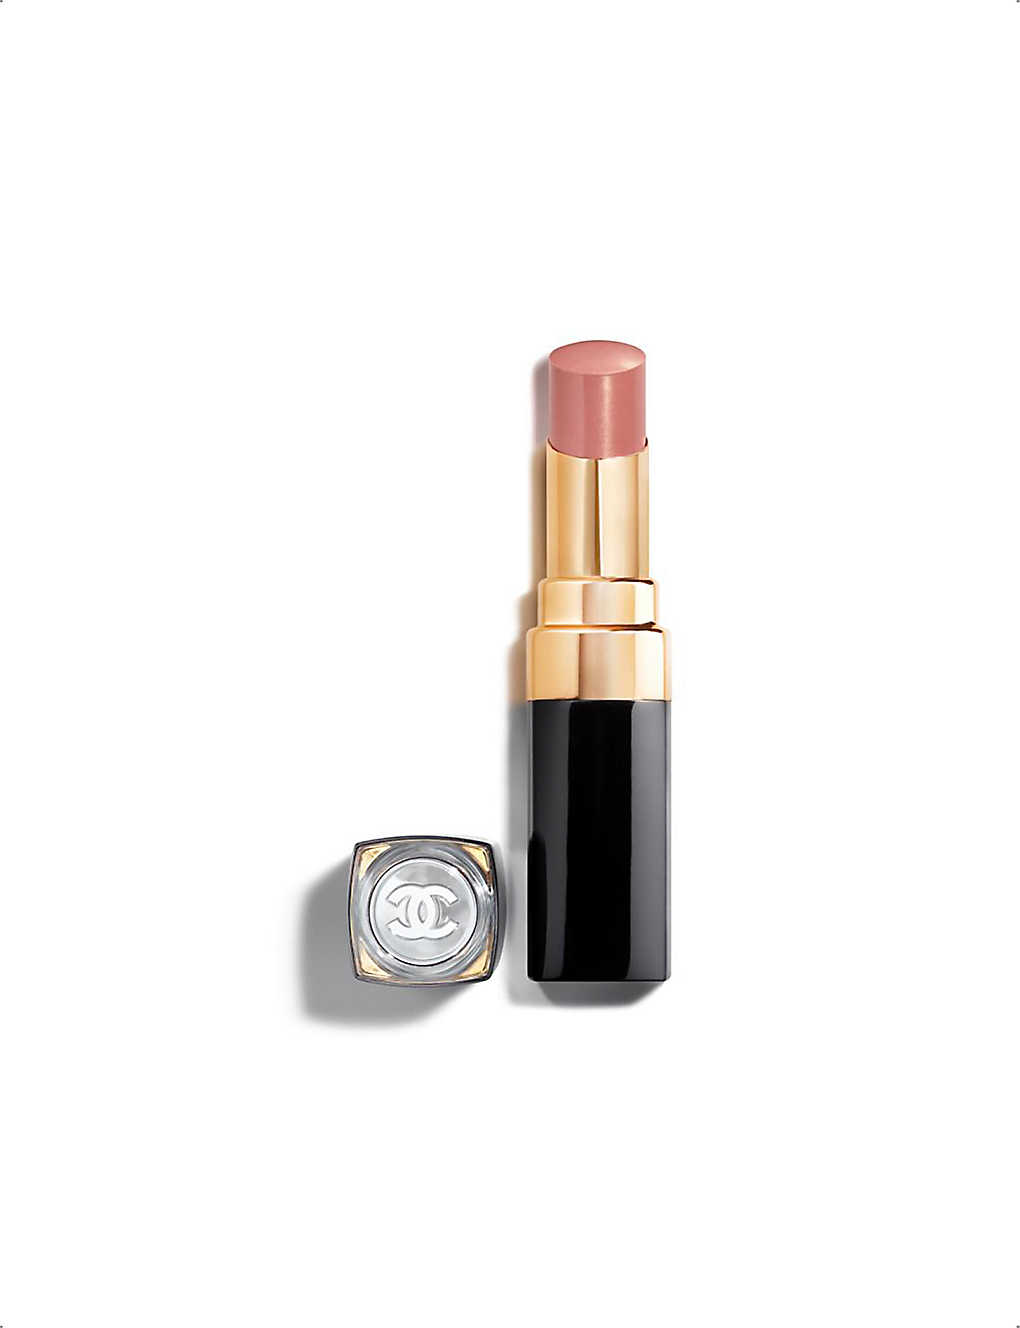 Chanel Easy Rouge Coco Flash Colour, Shine, Intensity In A Flash Lipstick 3g